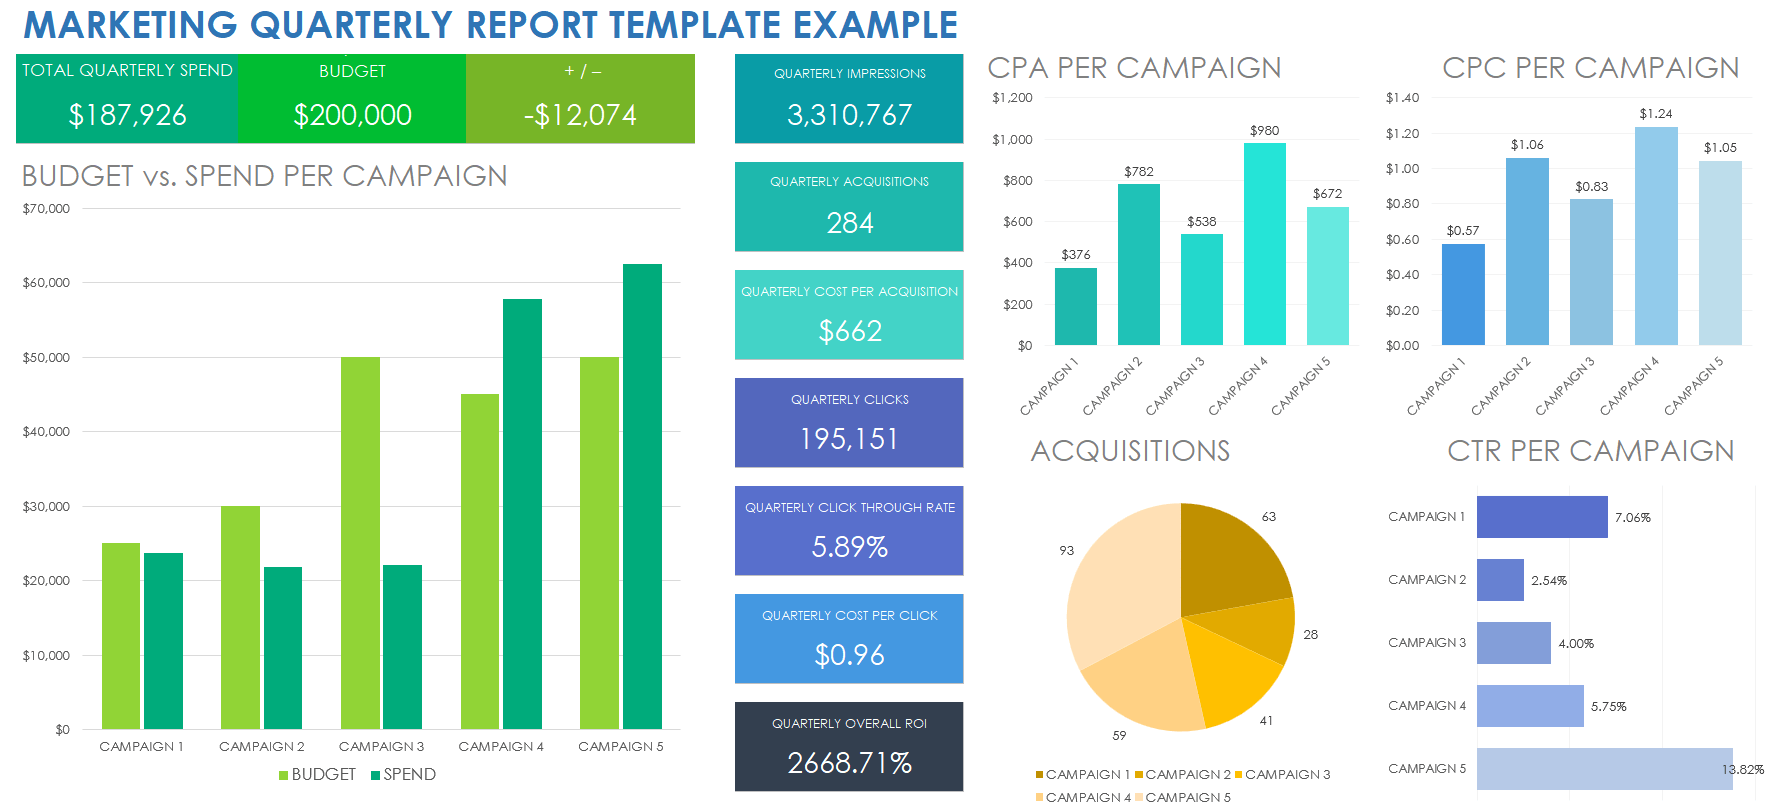 Quarterly Marketing Report Example Template